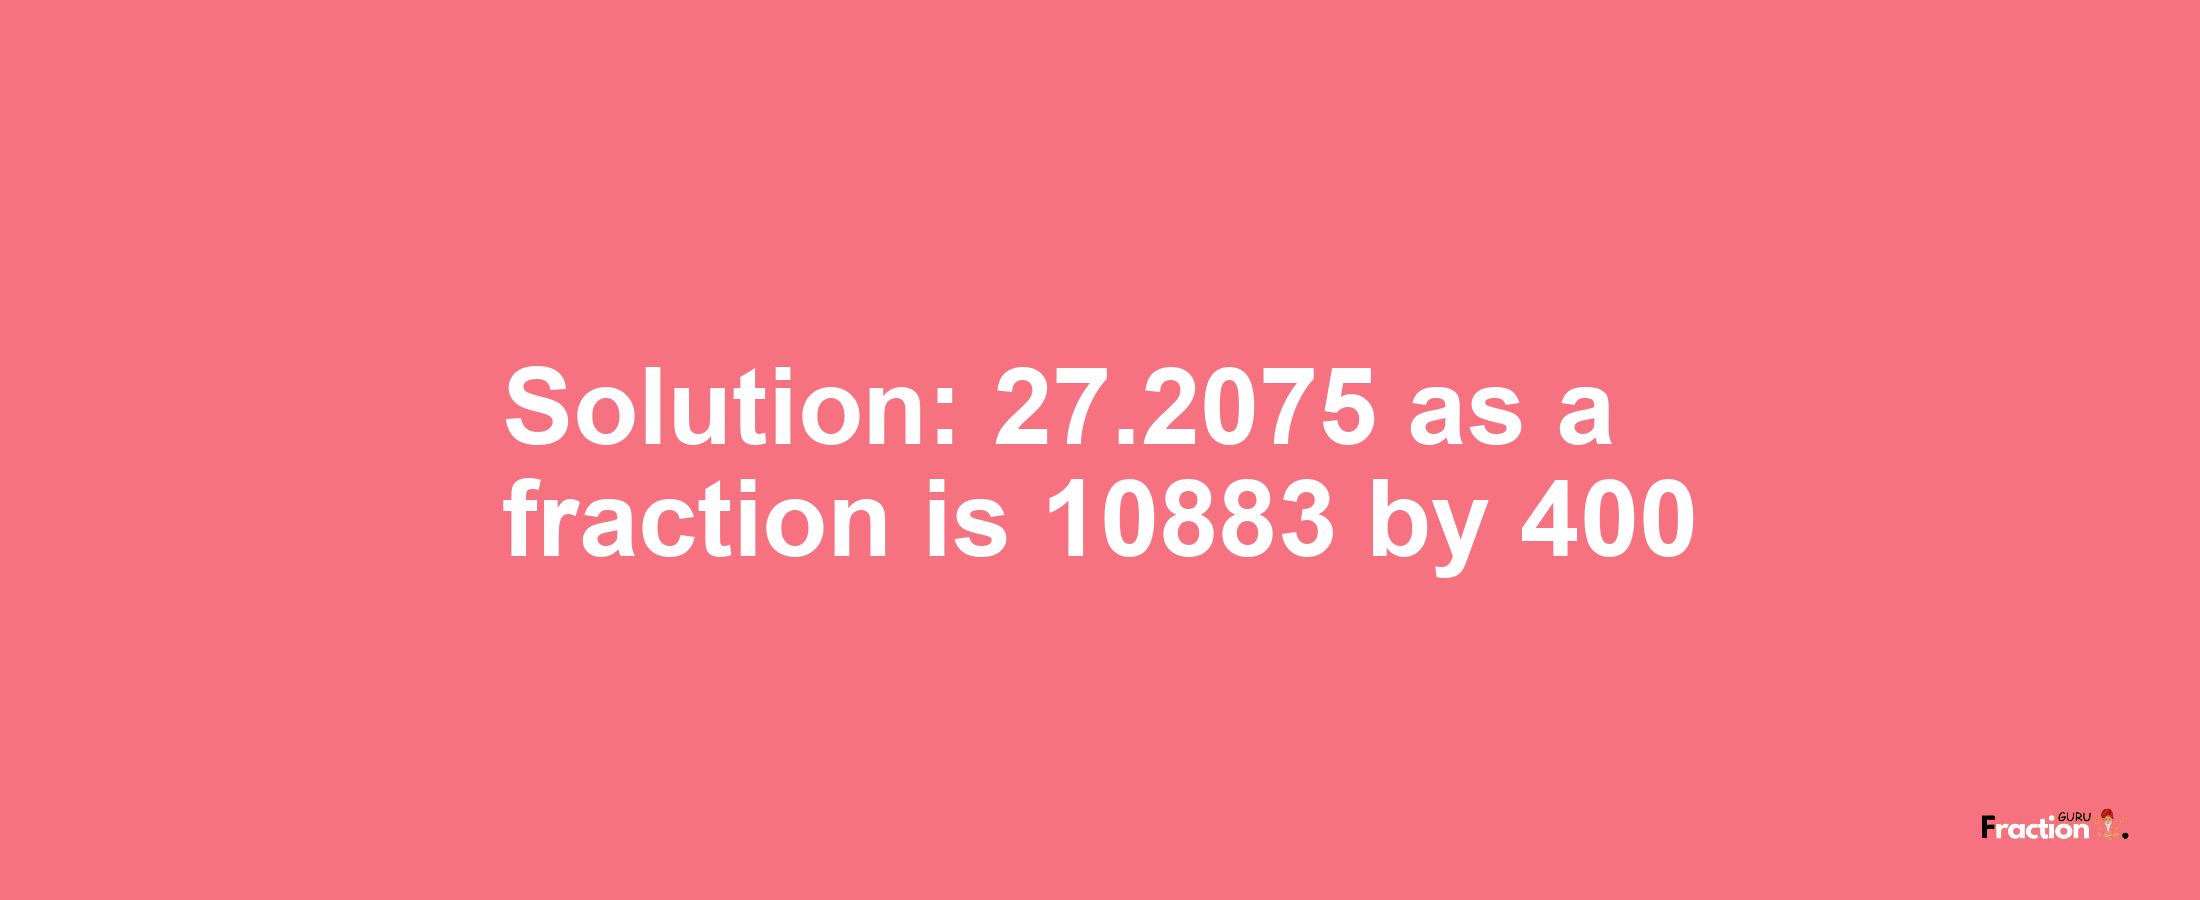 Solution:27.2075 as a fraction is 10883/400